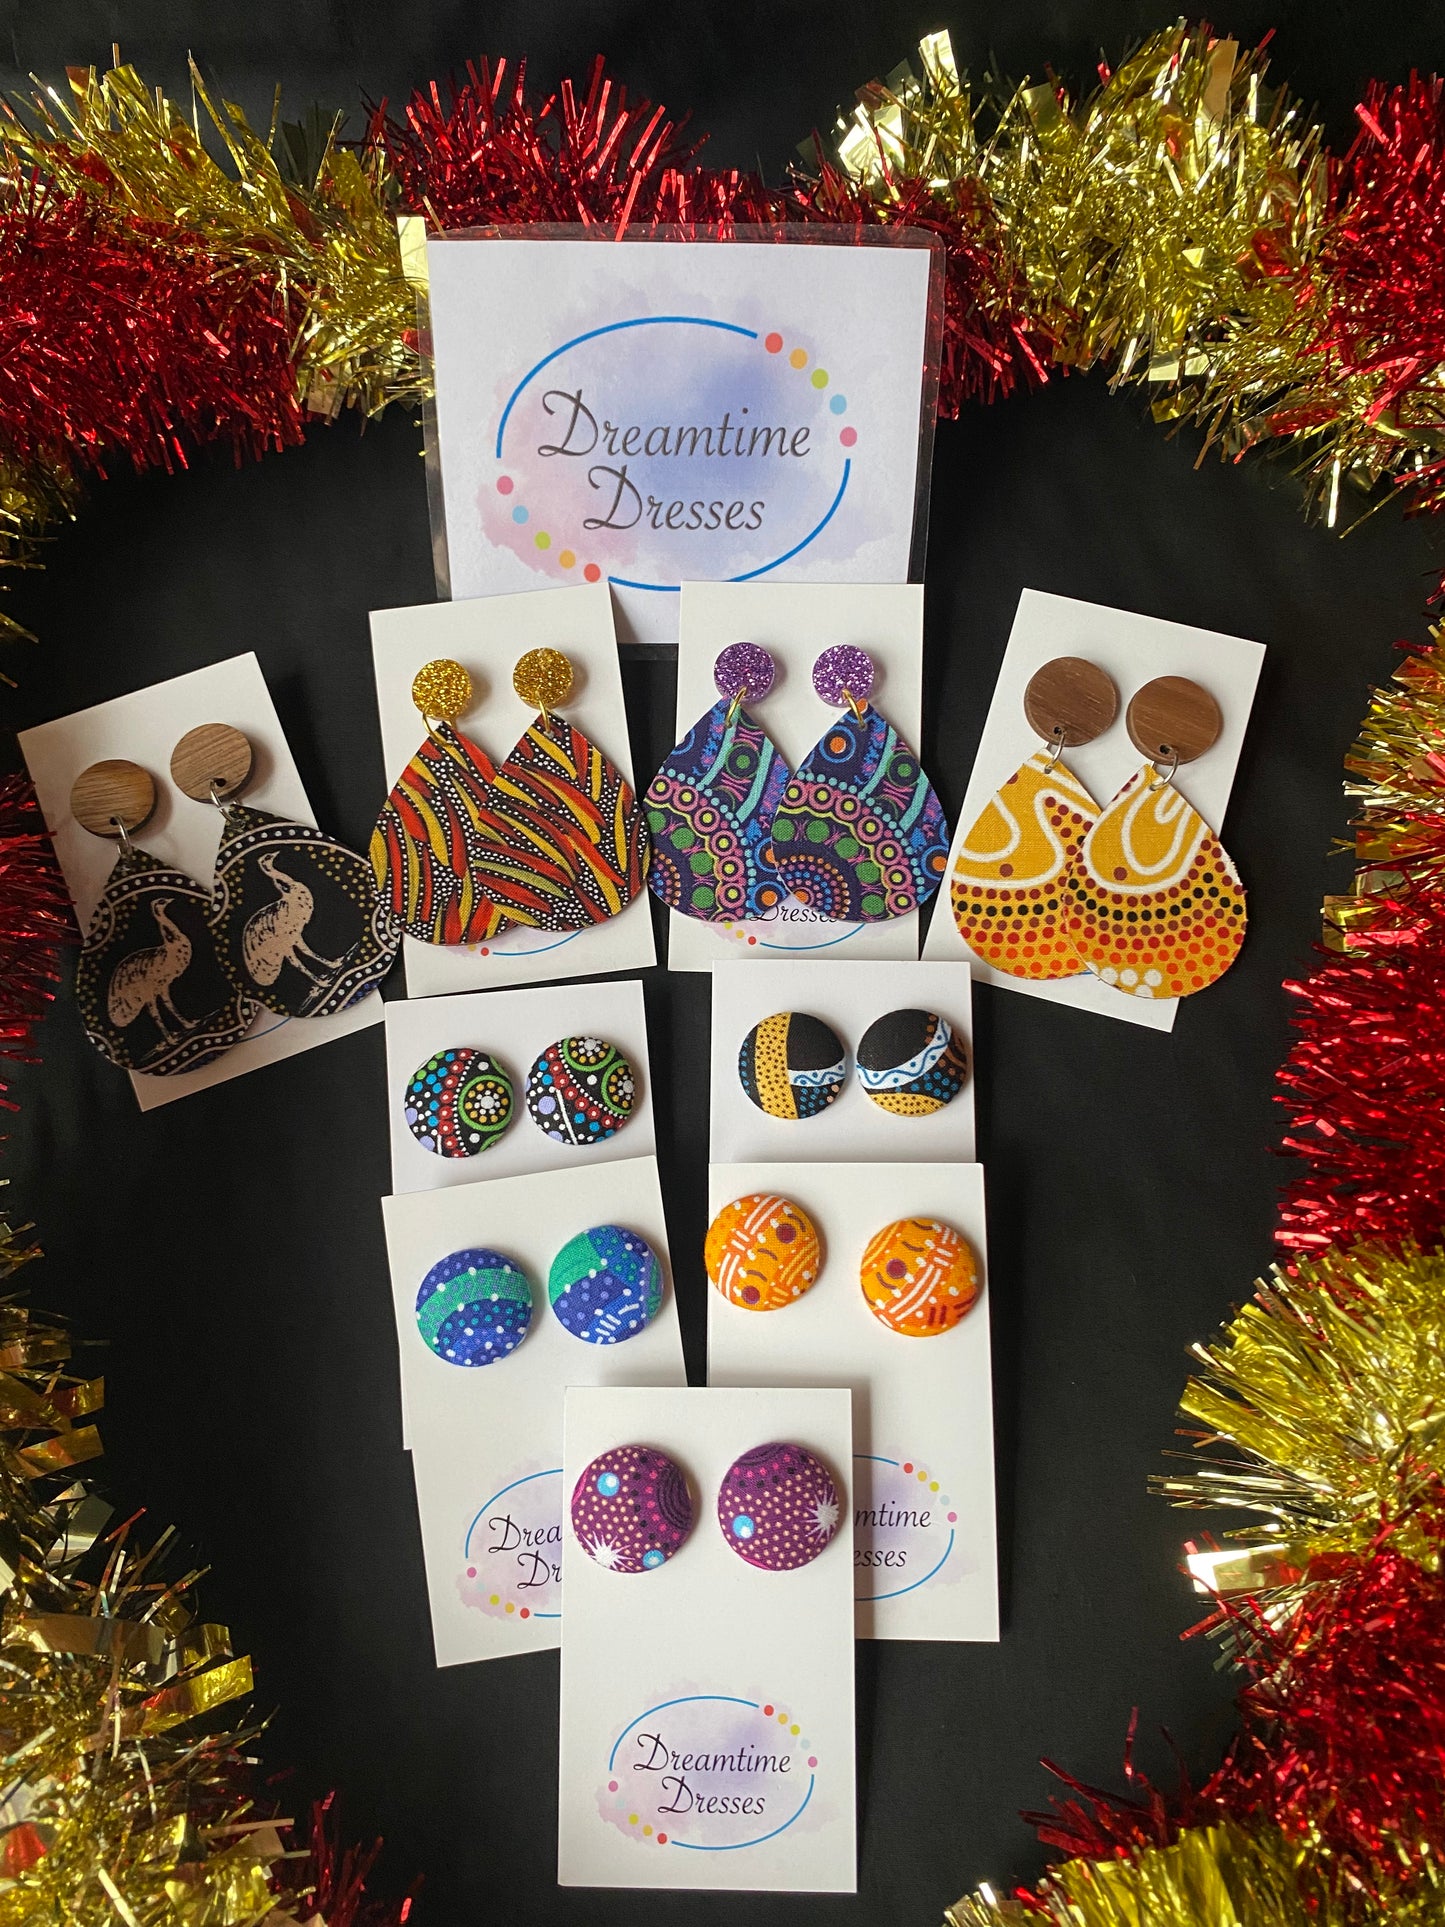 Mystery Variety pack (earrings and scrunchies)